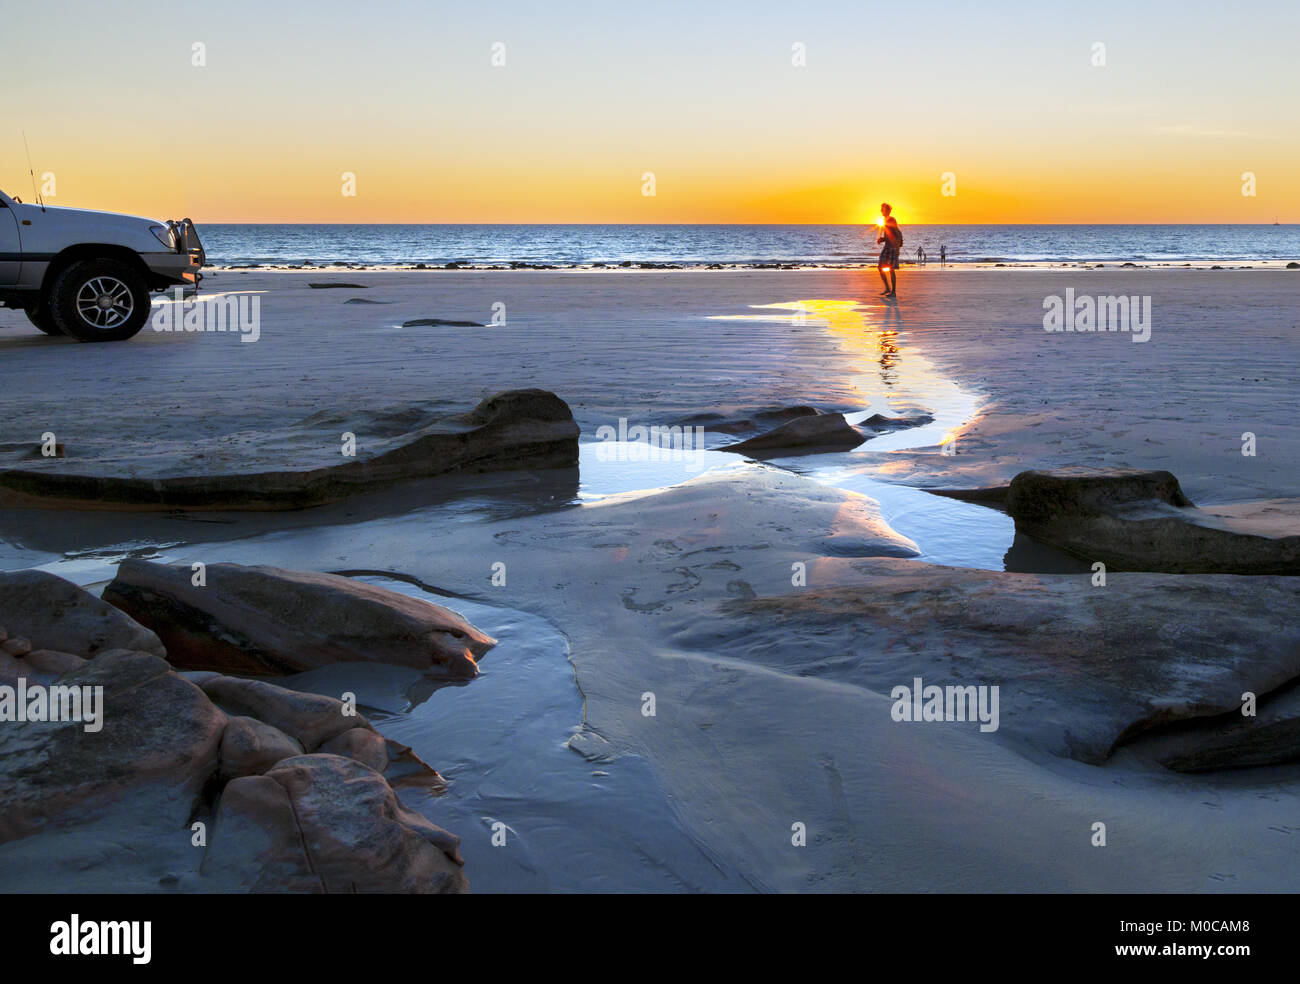 A leisurely stroll along Cable beach, Broome, Western Australia. Stock Photo